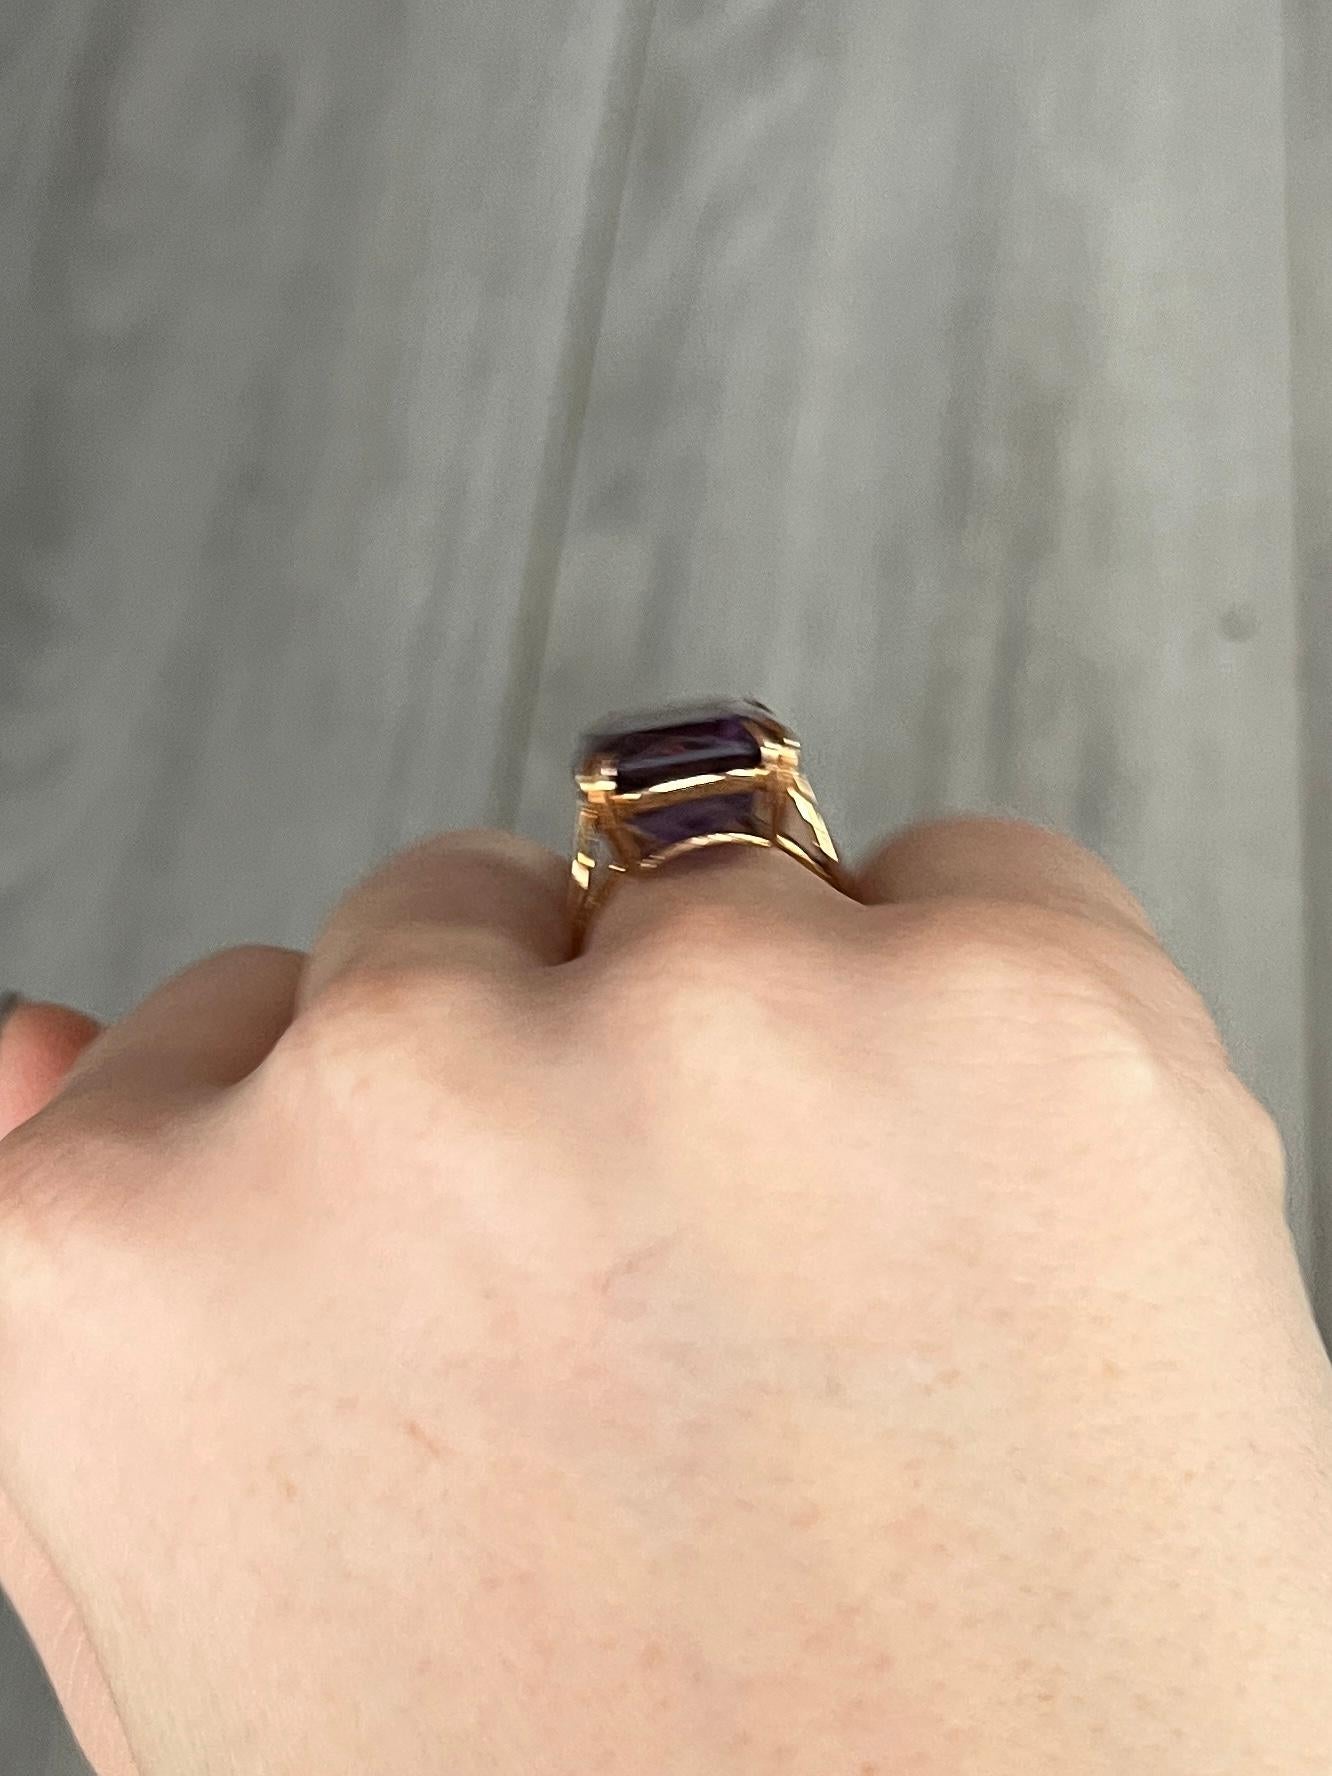 The amethyst set up high upon this ring is a gorgeous purple stone held in simple claws. Modelled in 9carat gold and has an open work gallery. Hallmarked Birmingham 1972.

Ring Size: H or 3 3/4
Stone Dimensions: 17x13mm 

Weight: 4.8g